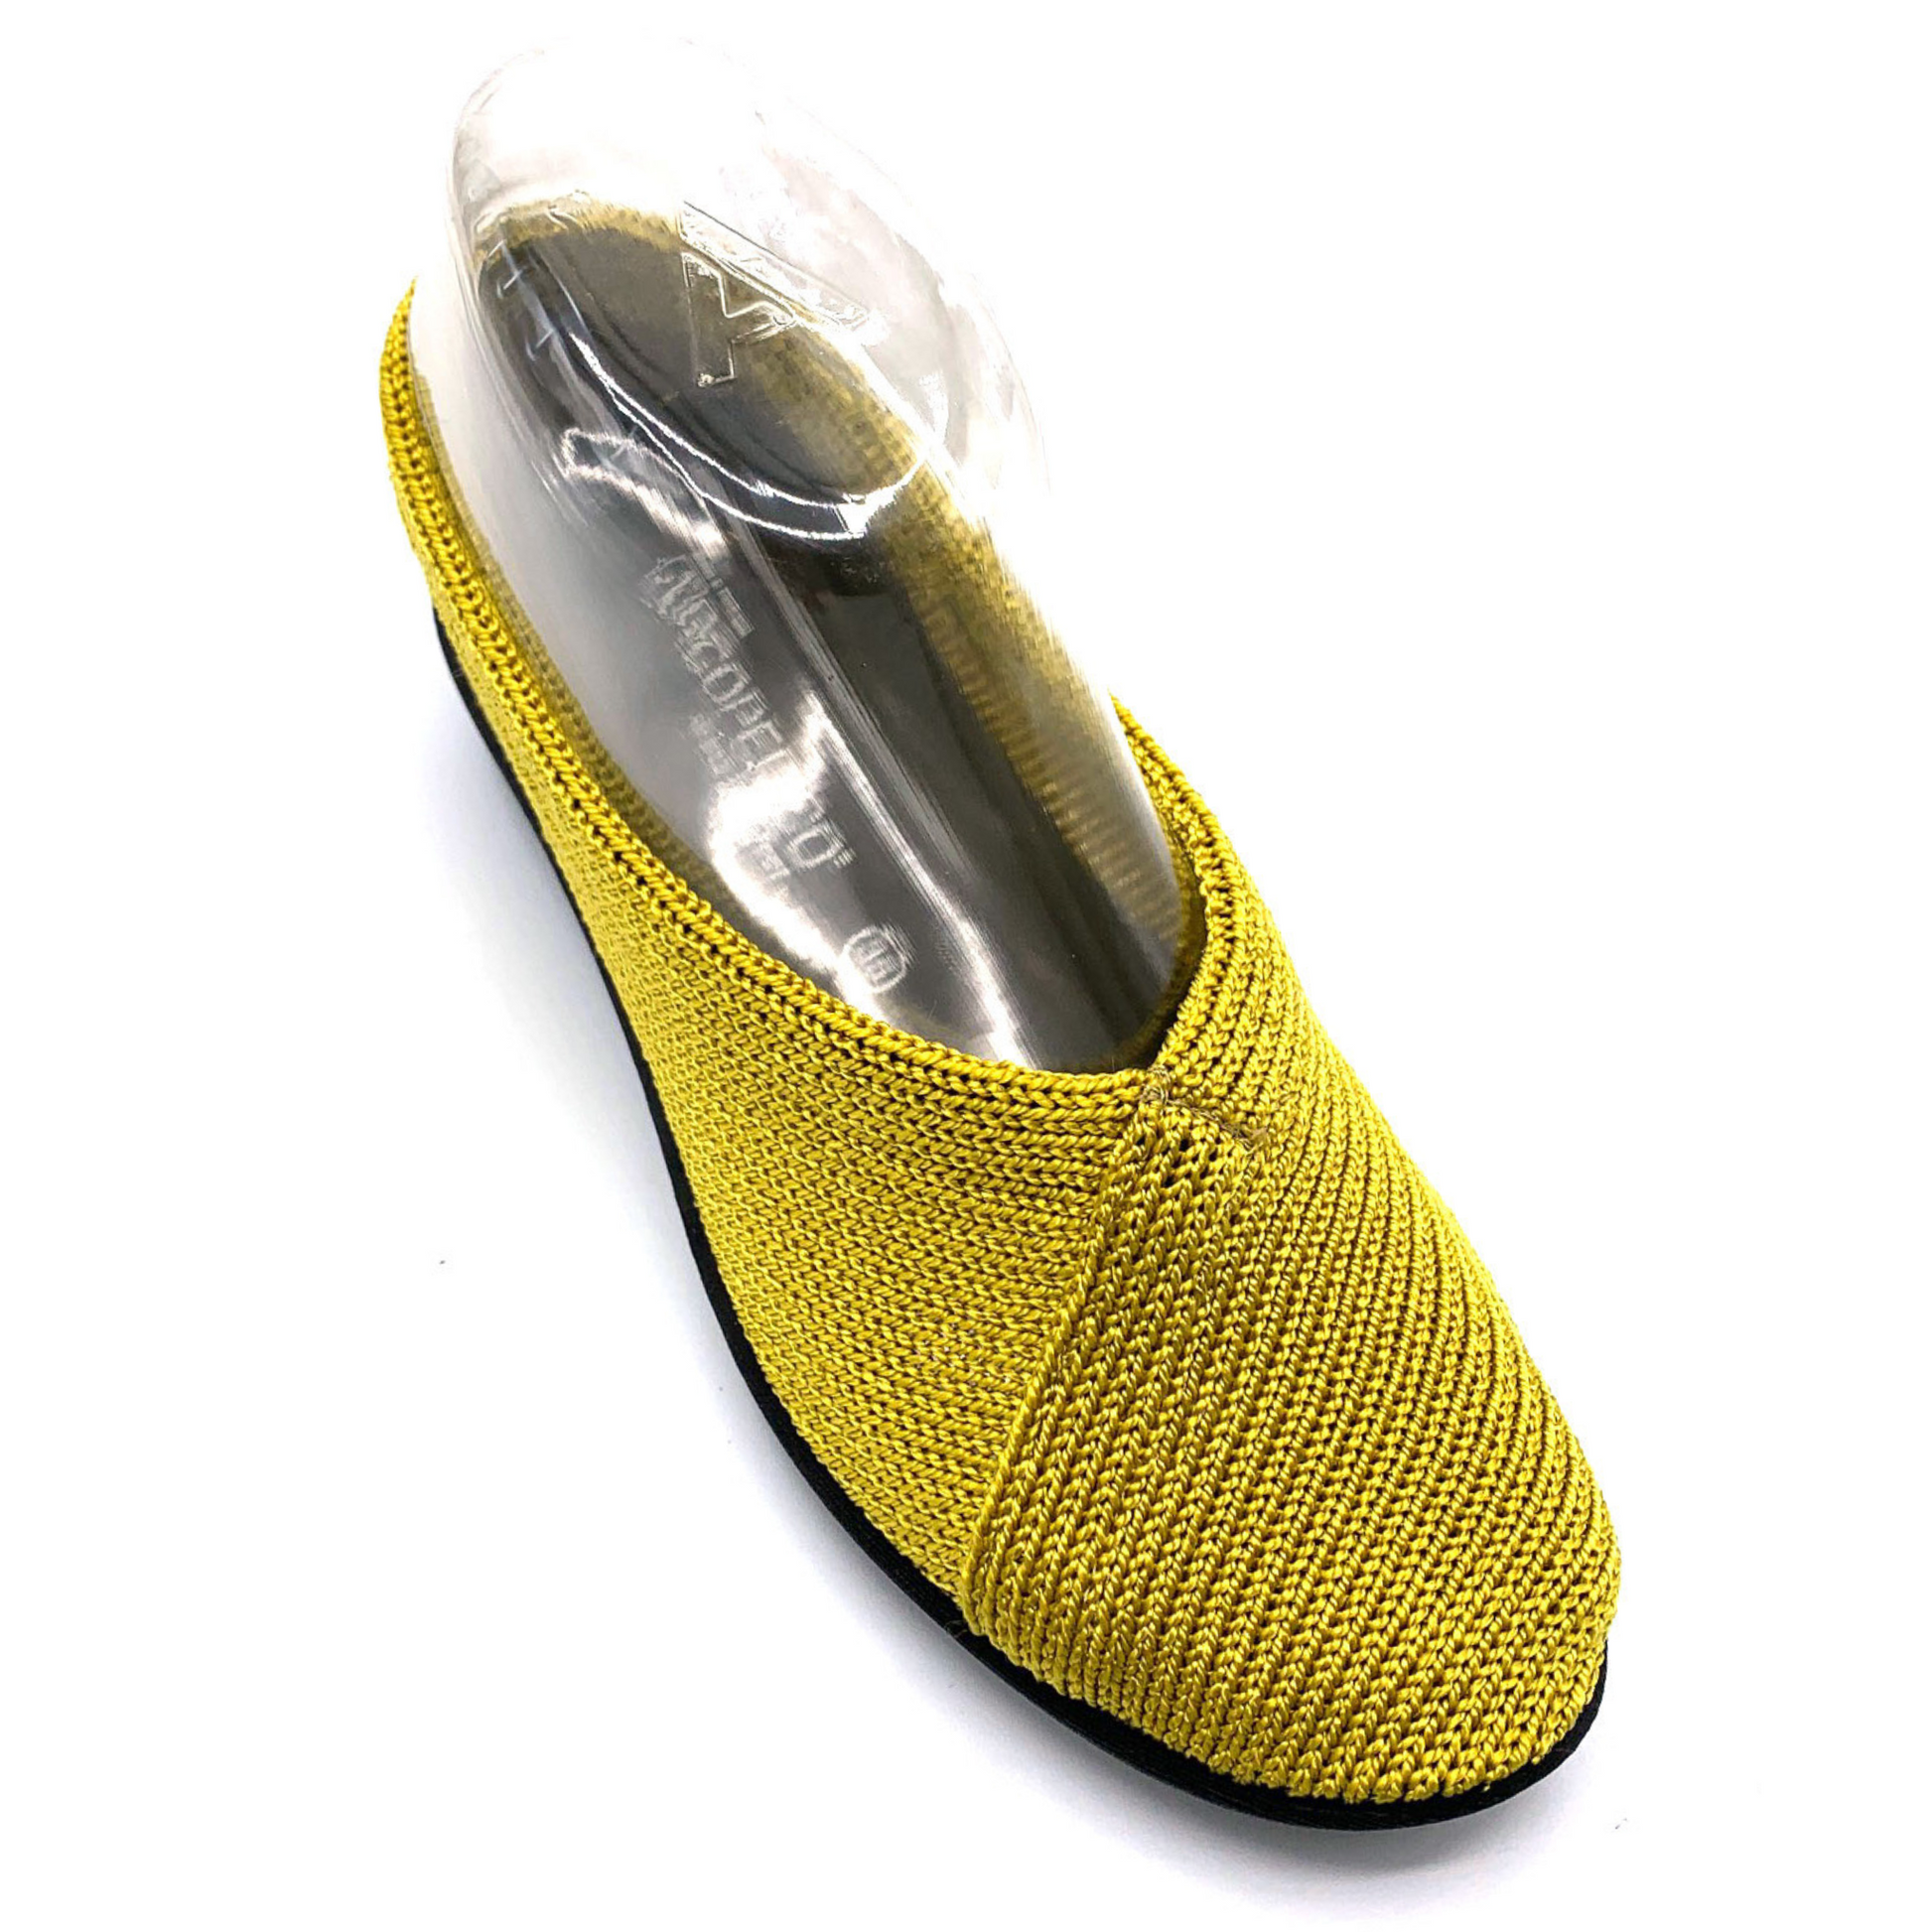 A yellow knit sneaker is pictured at an angle with the top-line crossing diagonally across the front side.